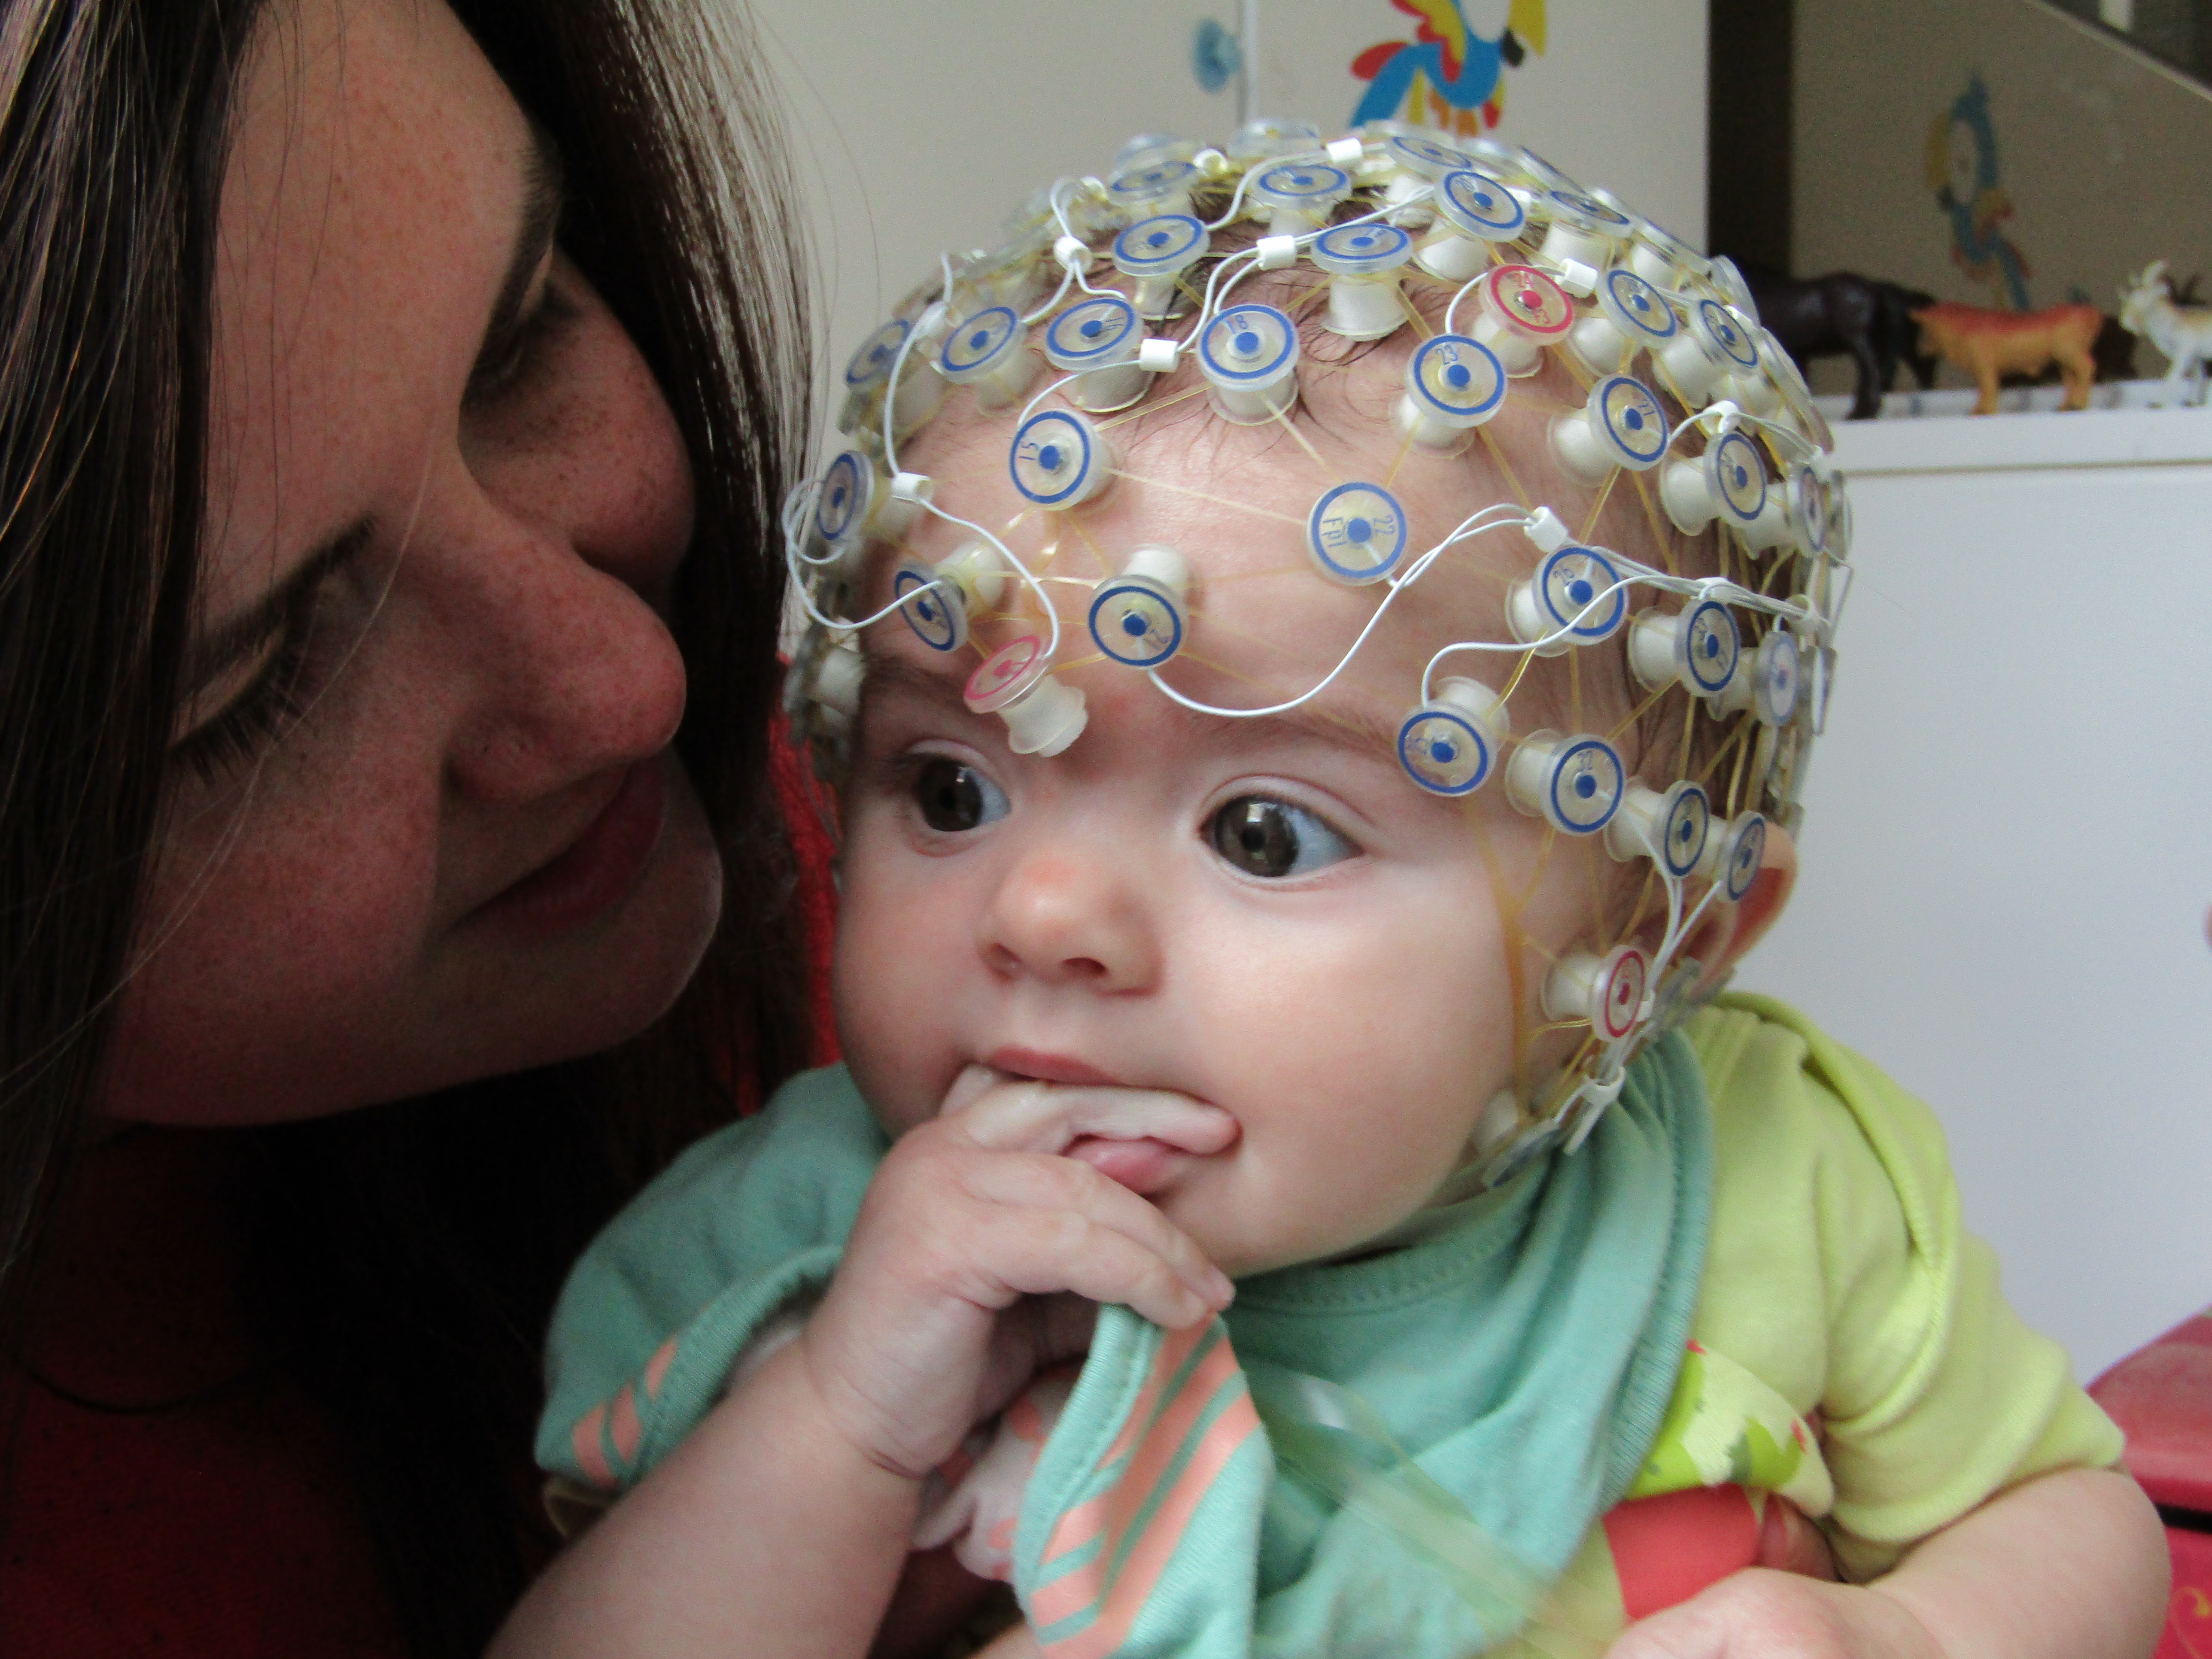 Baby with an EEG cap on to take part in the study, being held by their parent